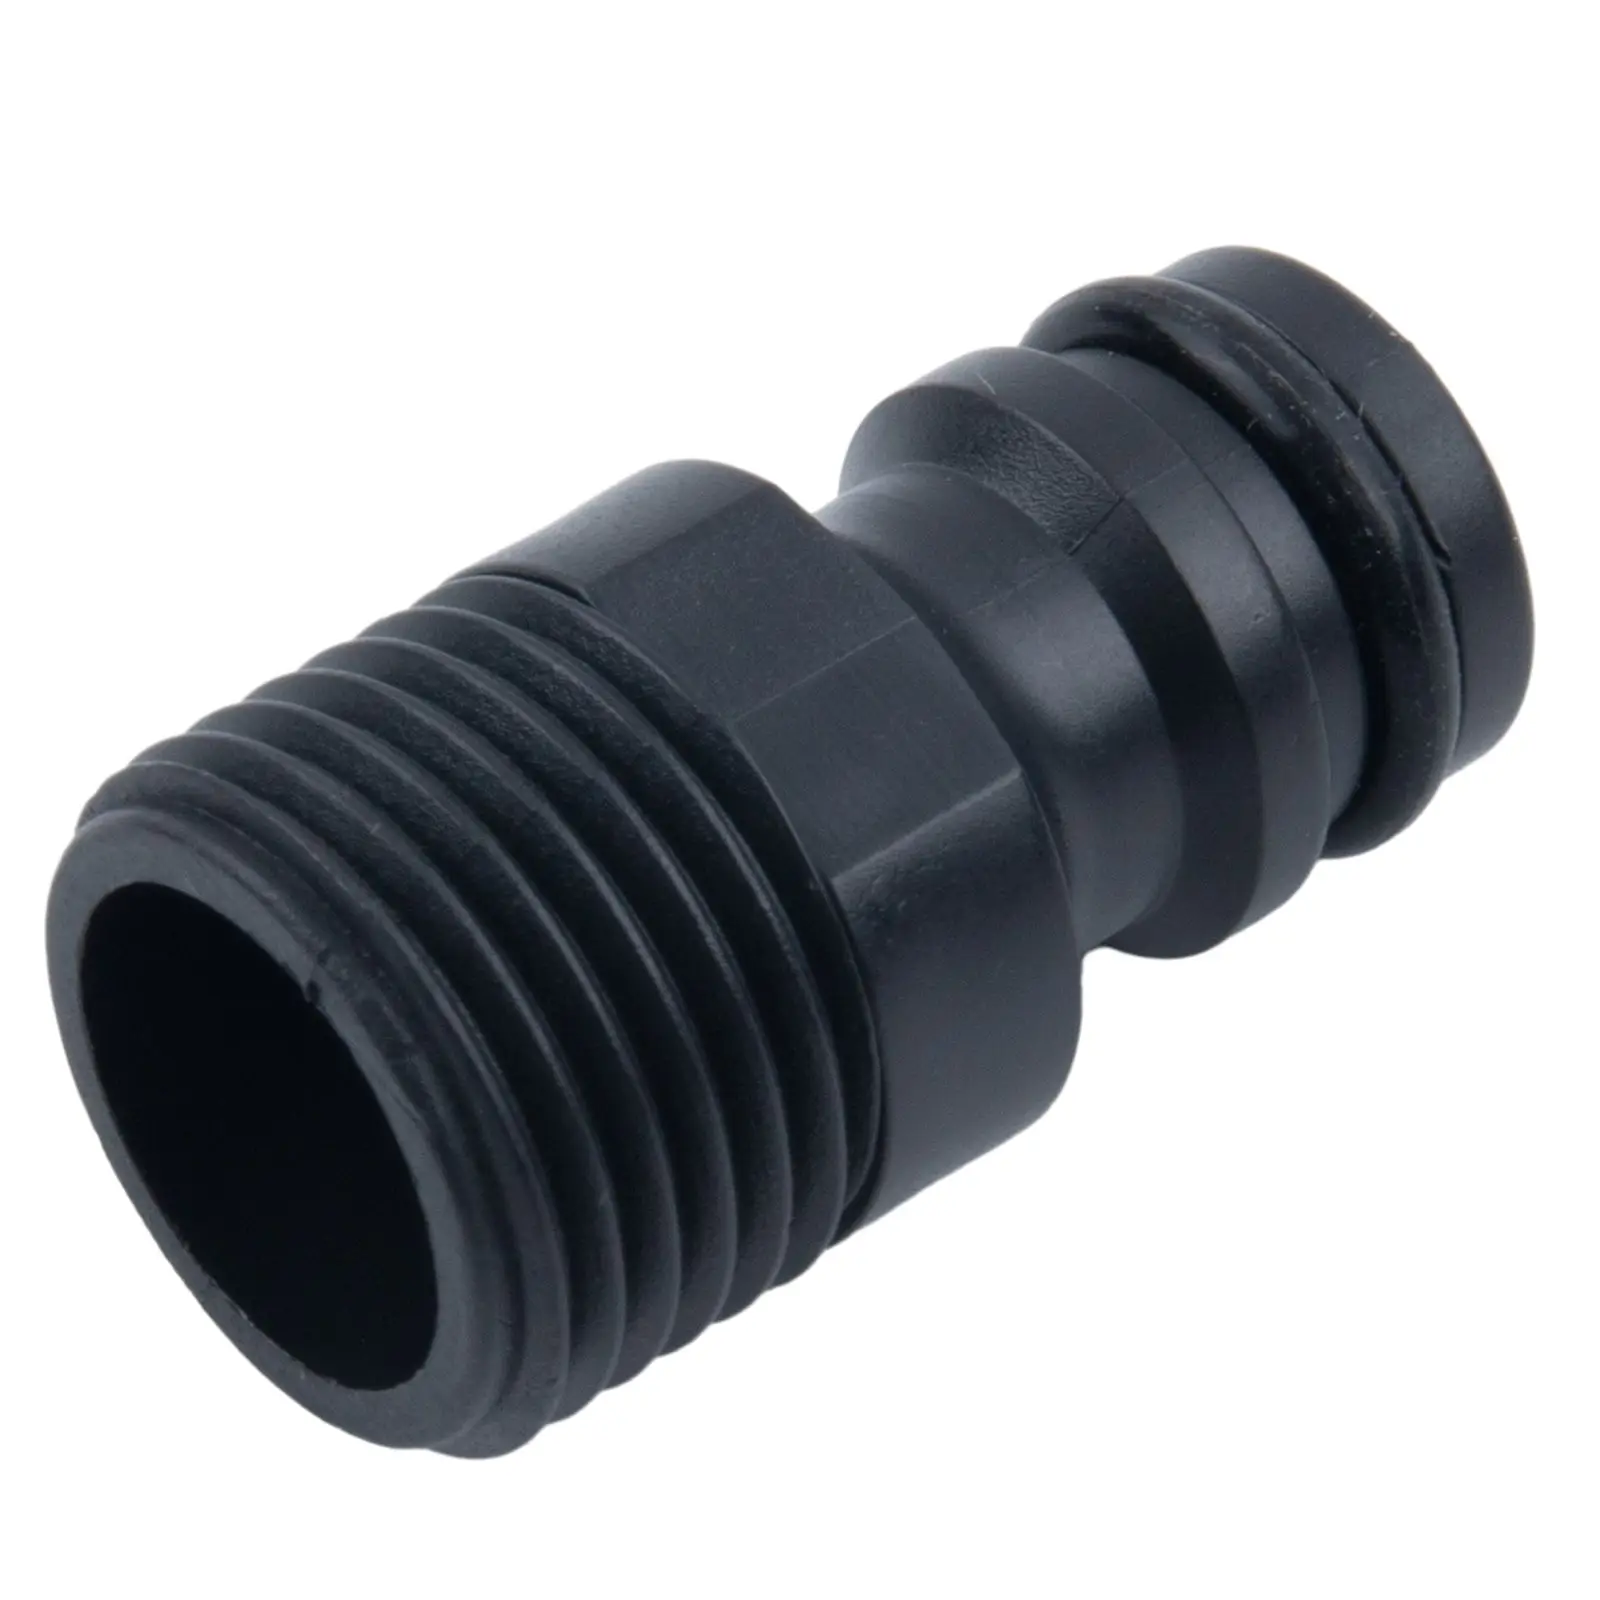 

2PC Plastic 1/2" BSP Threaded Tap Adaptor Garden Water Hose Quick Pipe Connector Fitting Outer 4 Points Thread